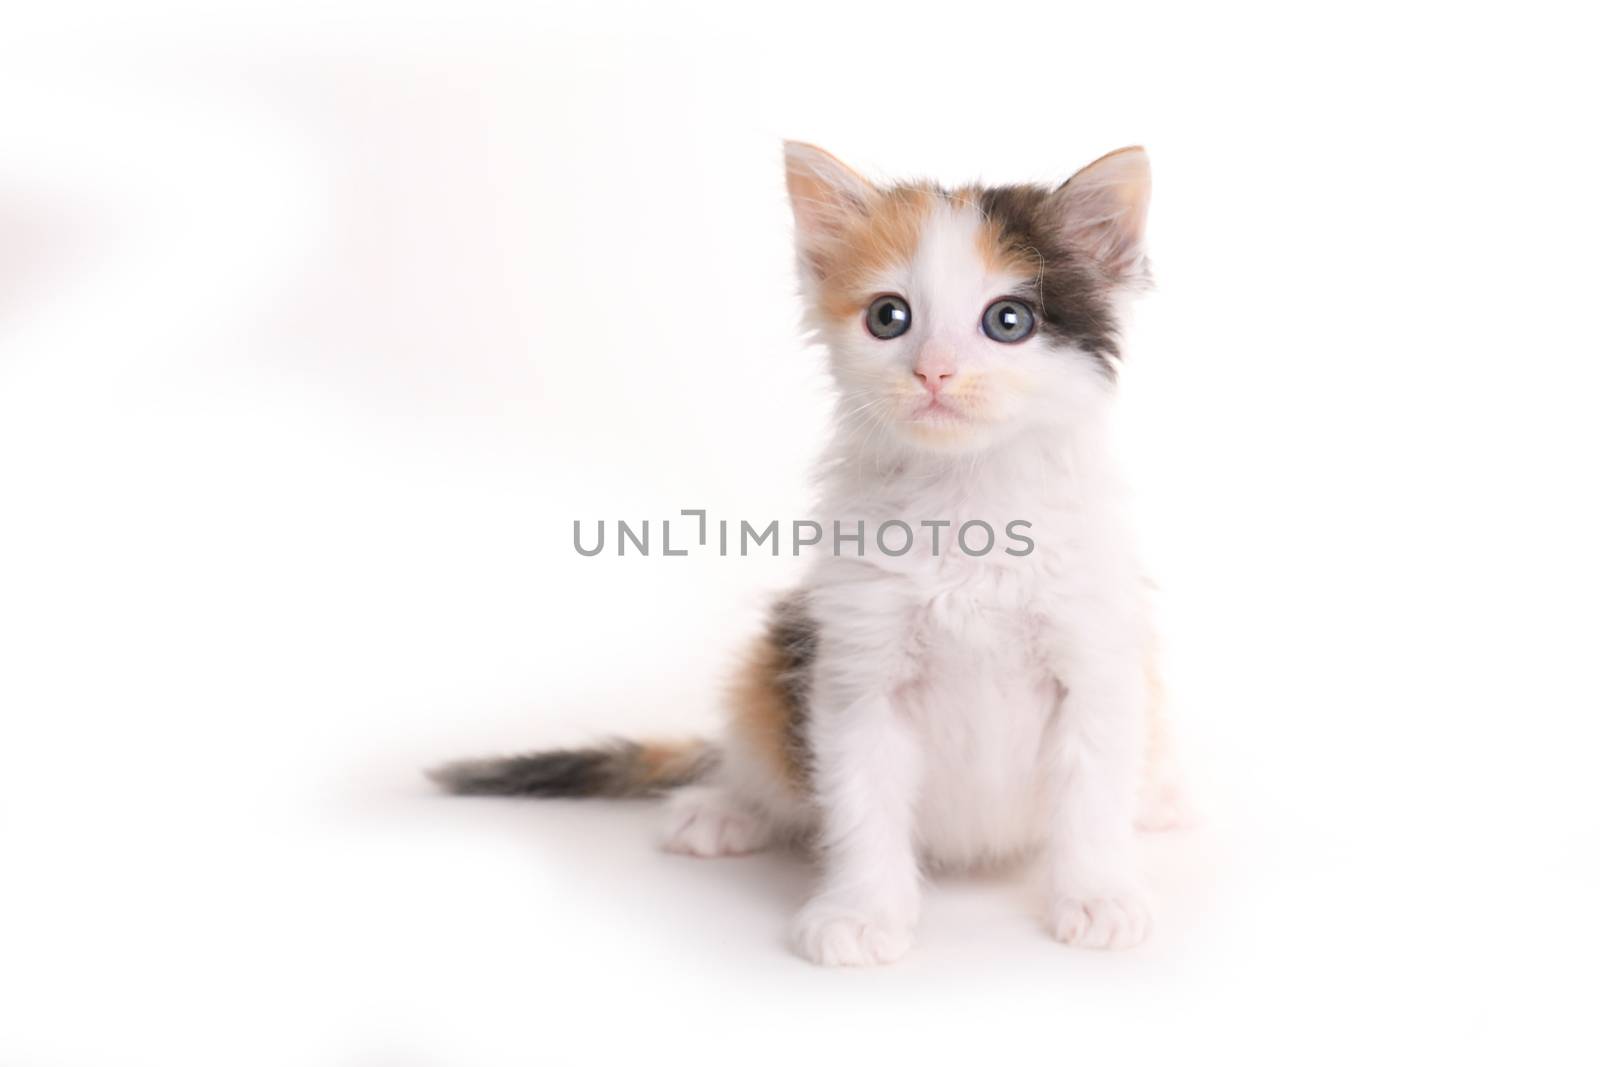 Kitten Looking Up With Curiosity on White Backgroud by tobkatrina